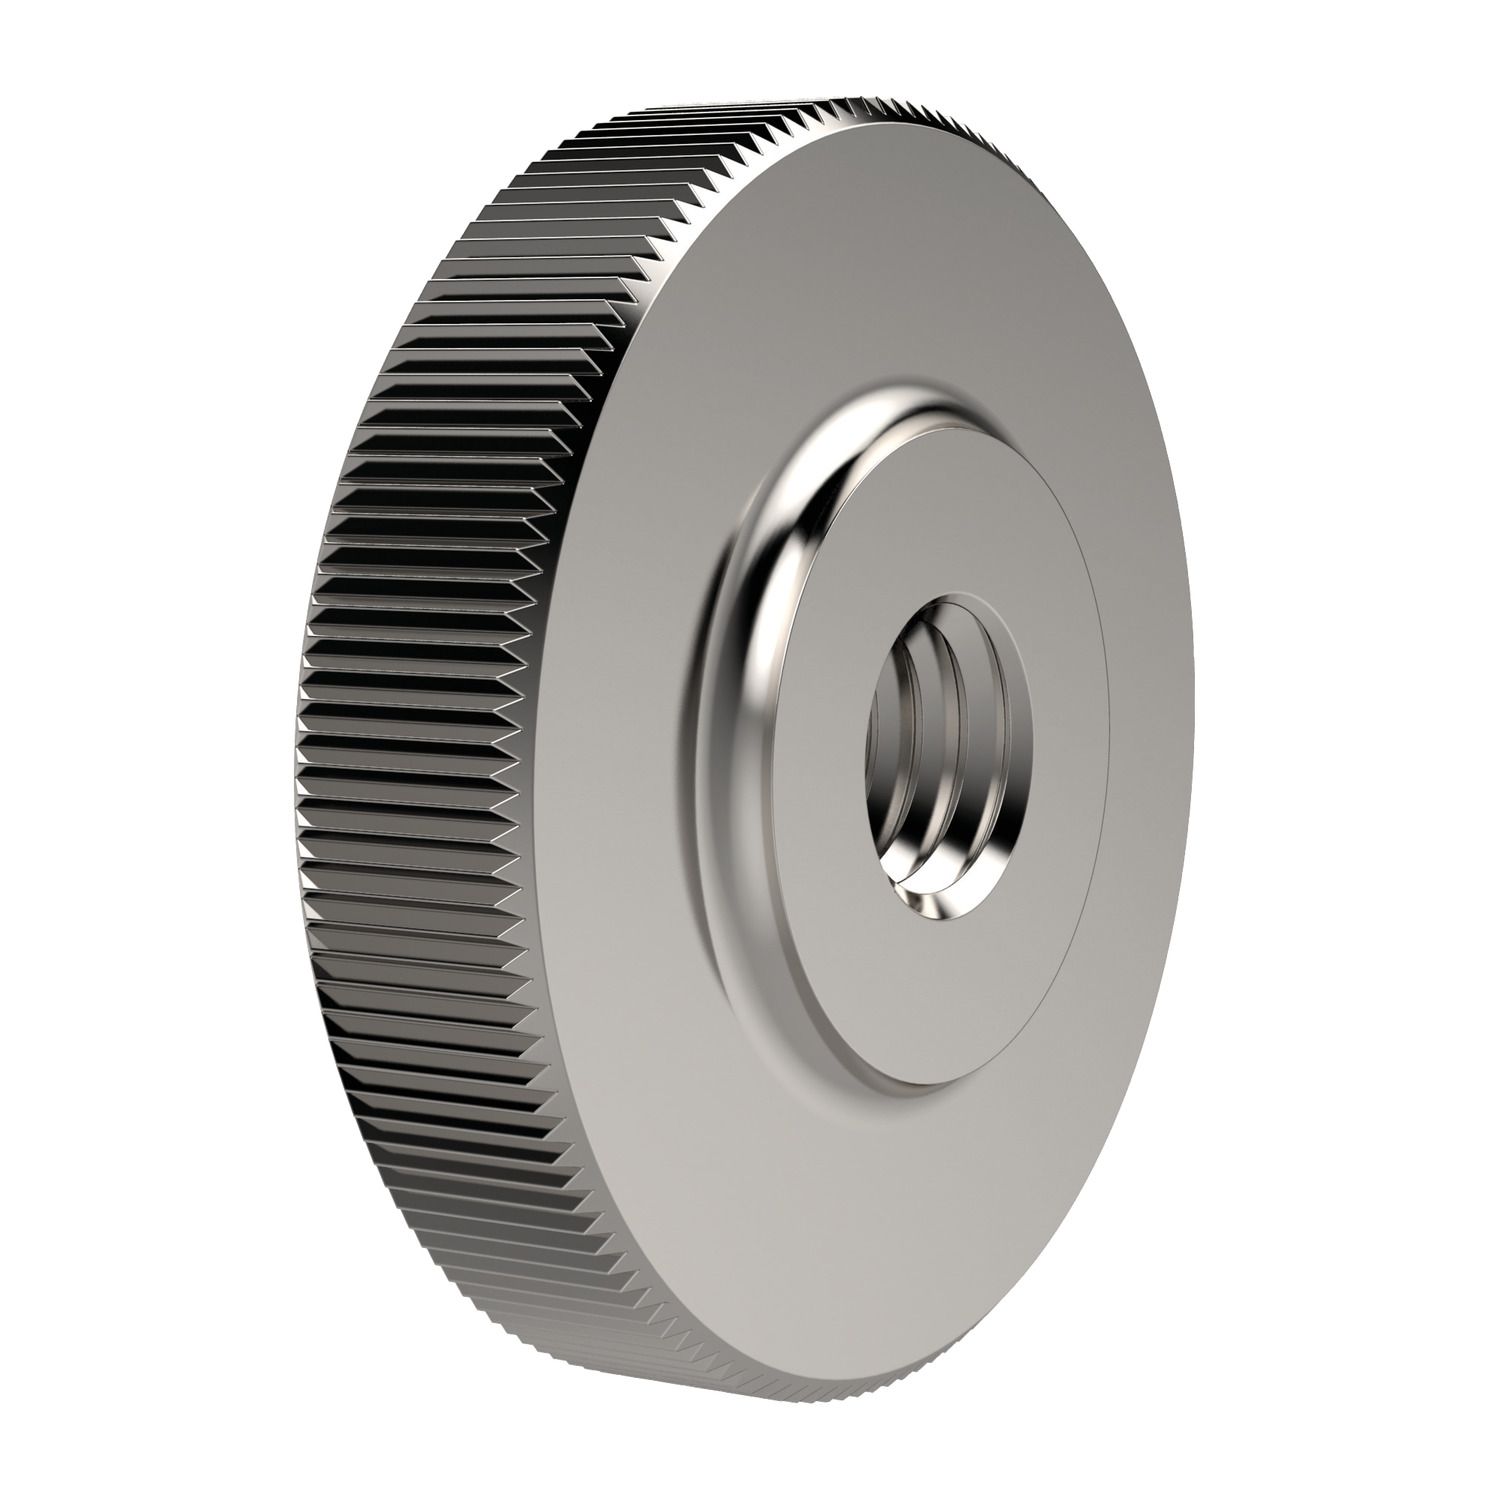 Flat Knurled Nuts Stainless Steel Thumb Nut to DIN 467.